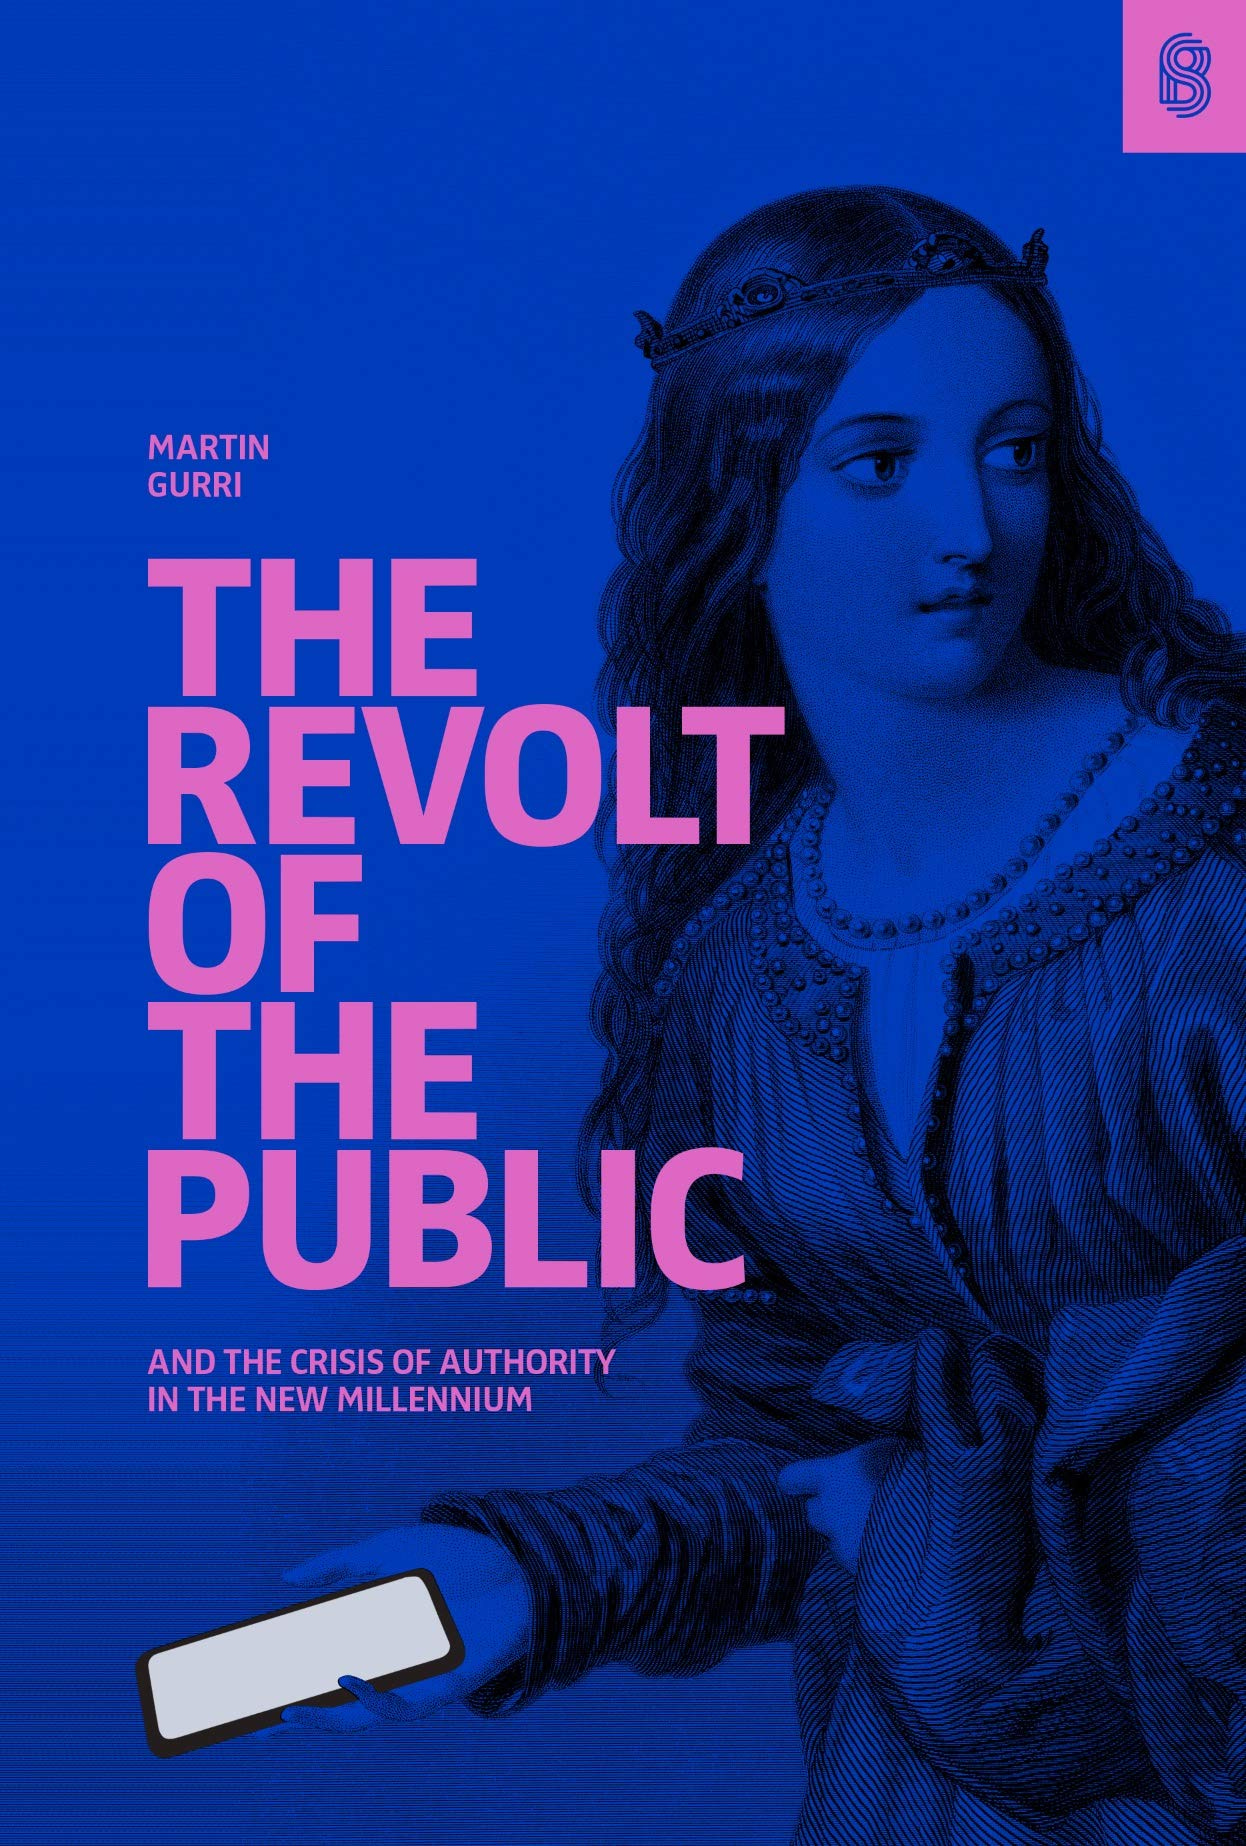 Amazon.com: The Revolt of The Public and the Crisis of Authority in the New  Millennium: 9781732265141: Martin Gurri: Books